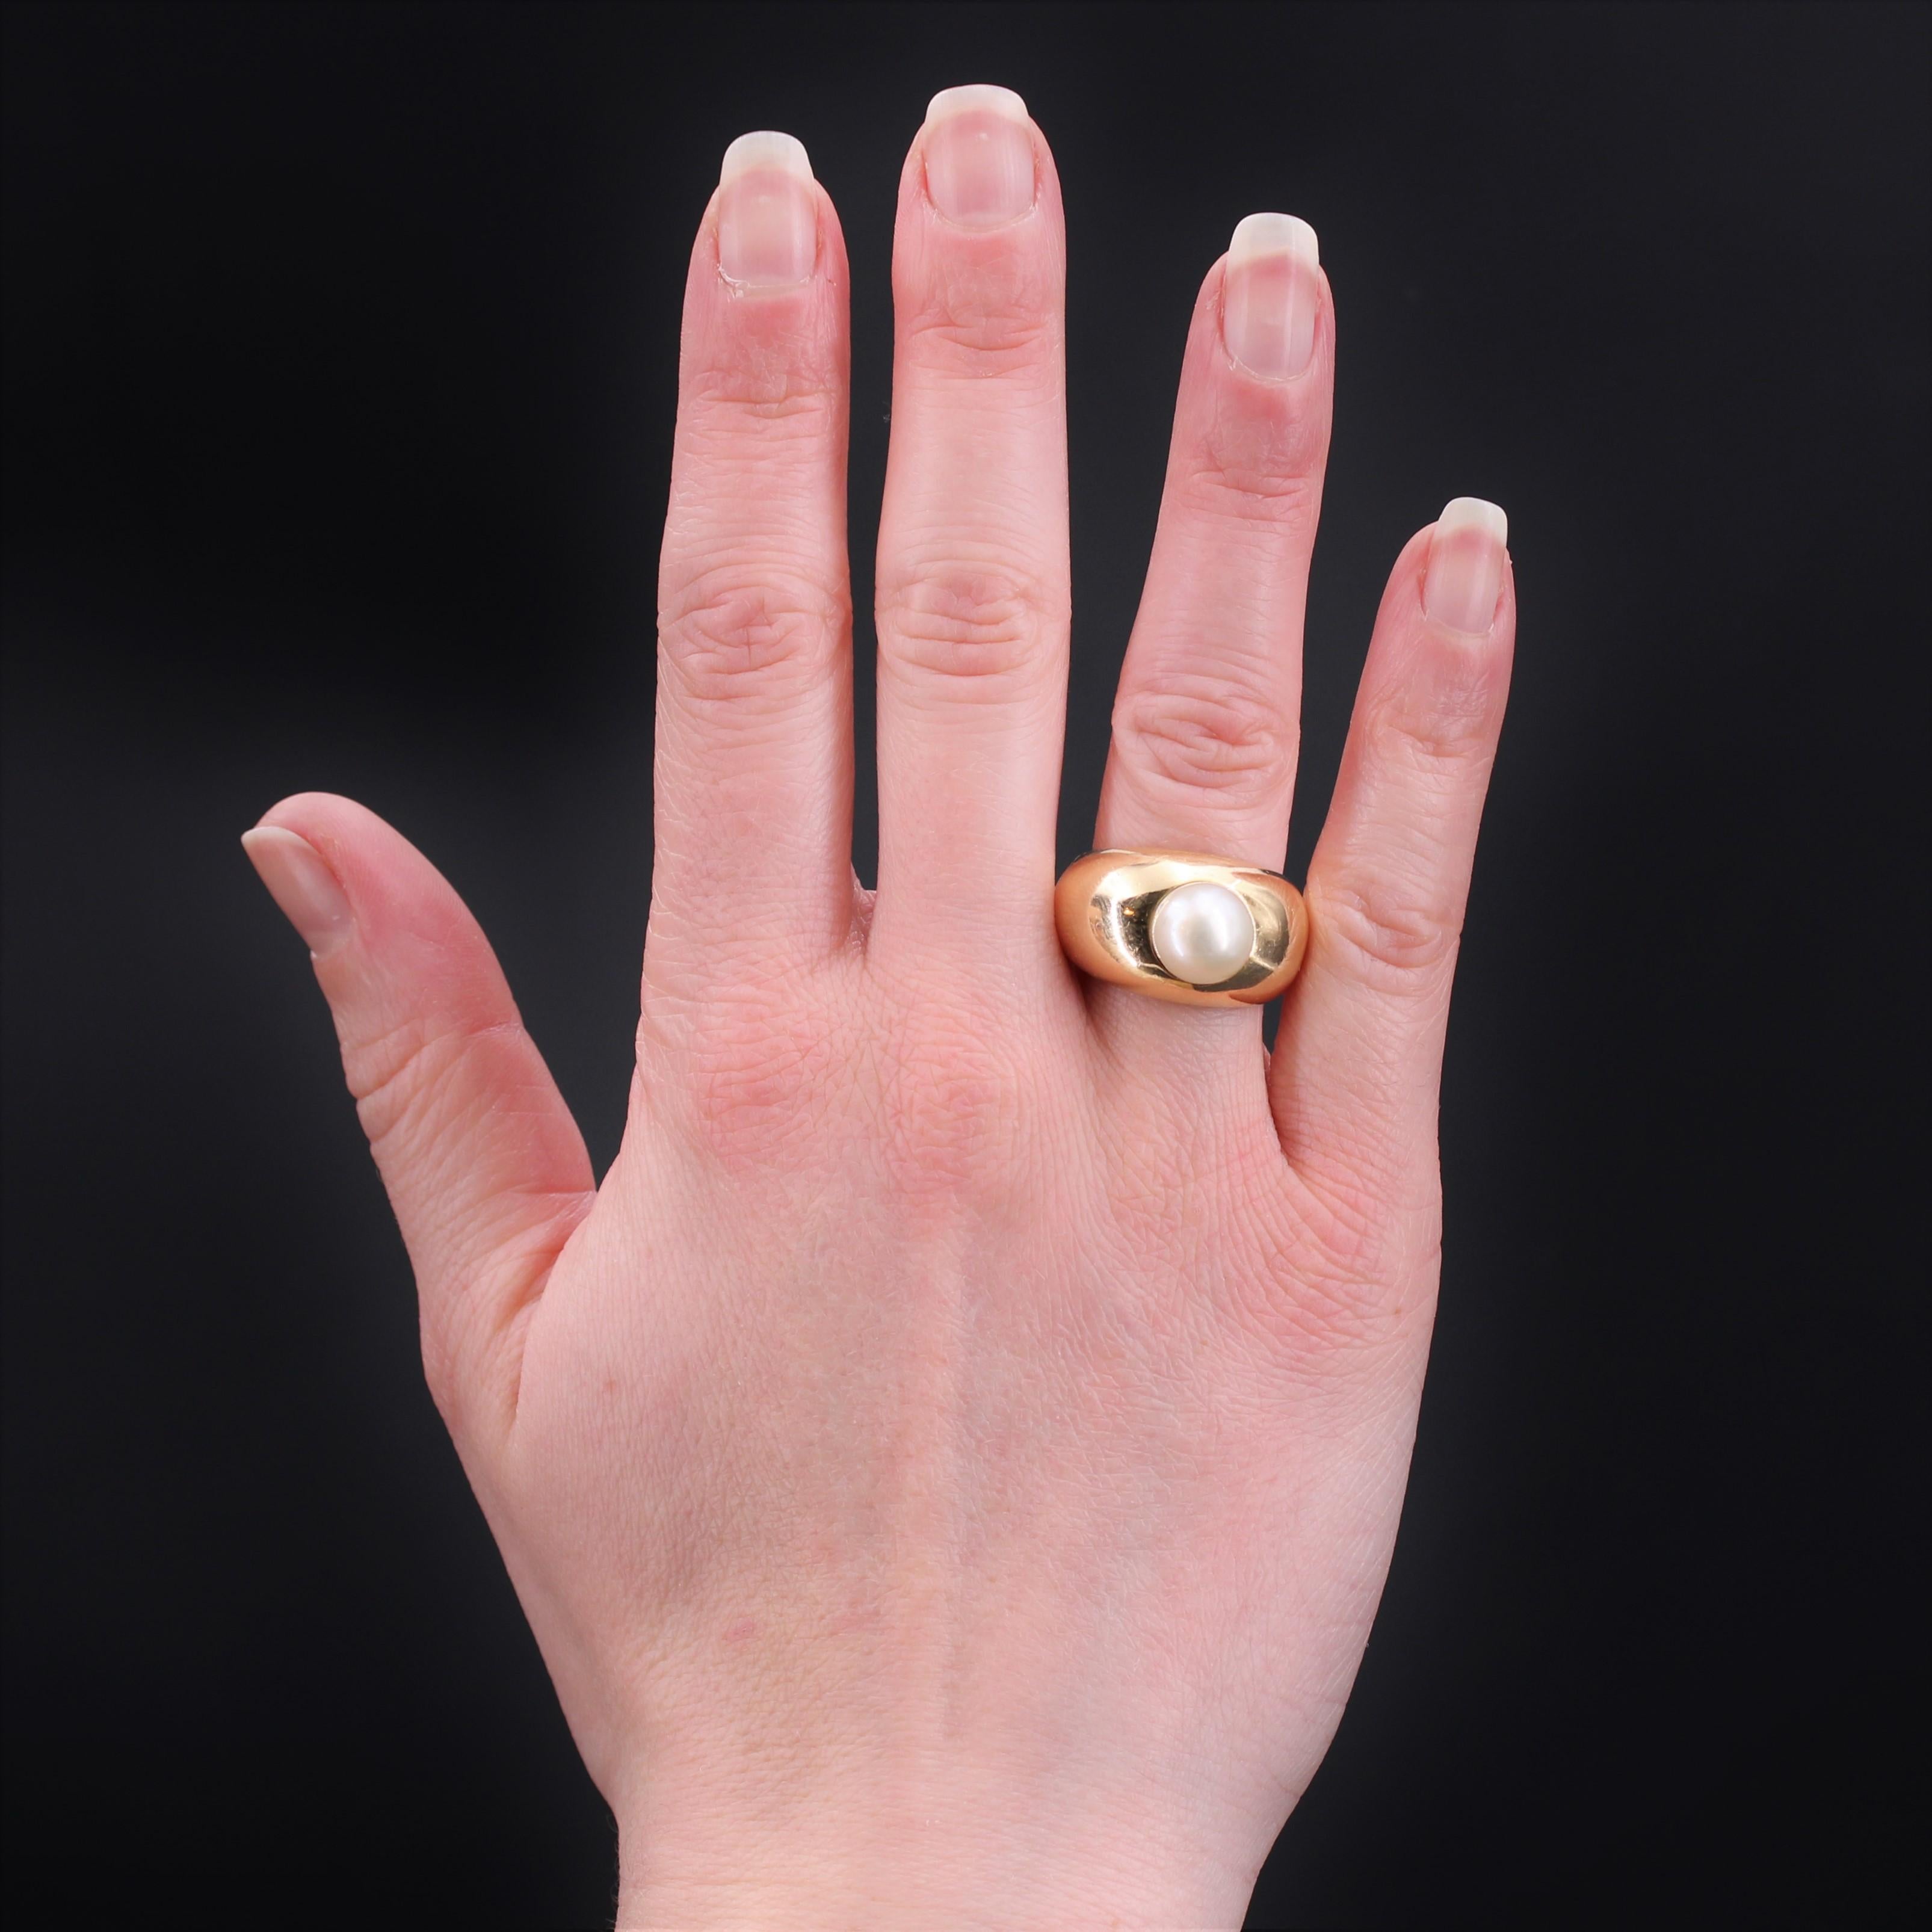 Ring in 18 karat yellow gold, owl hallmark.
Large bangle ring, it is formed of a decorated curved ring in closed setting on the top of a pearly white orient cultured button pearl.
Diameter of the pearl : 9/9.5 mm.
Height : 14 mm approximately,